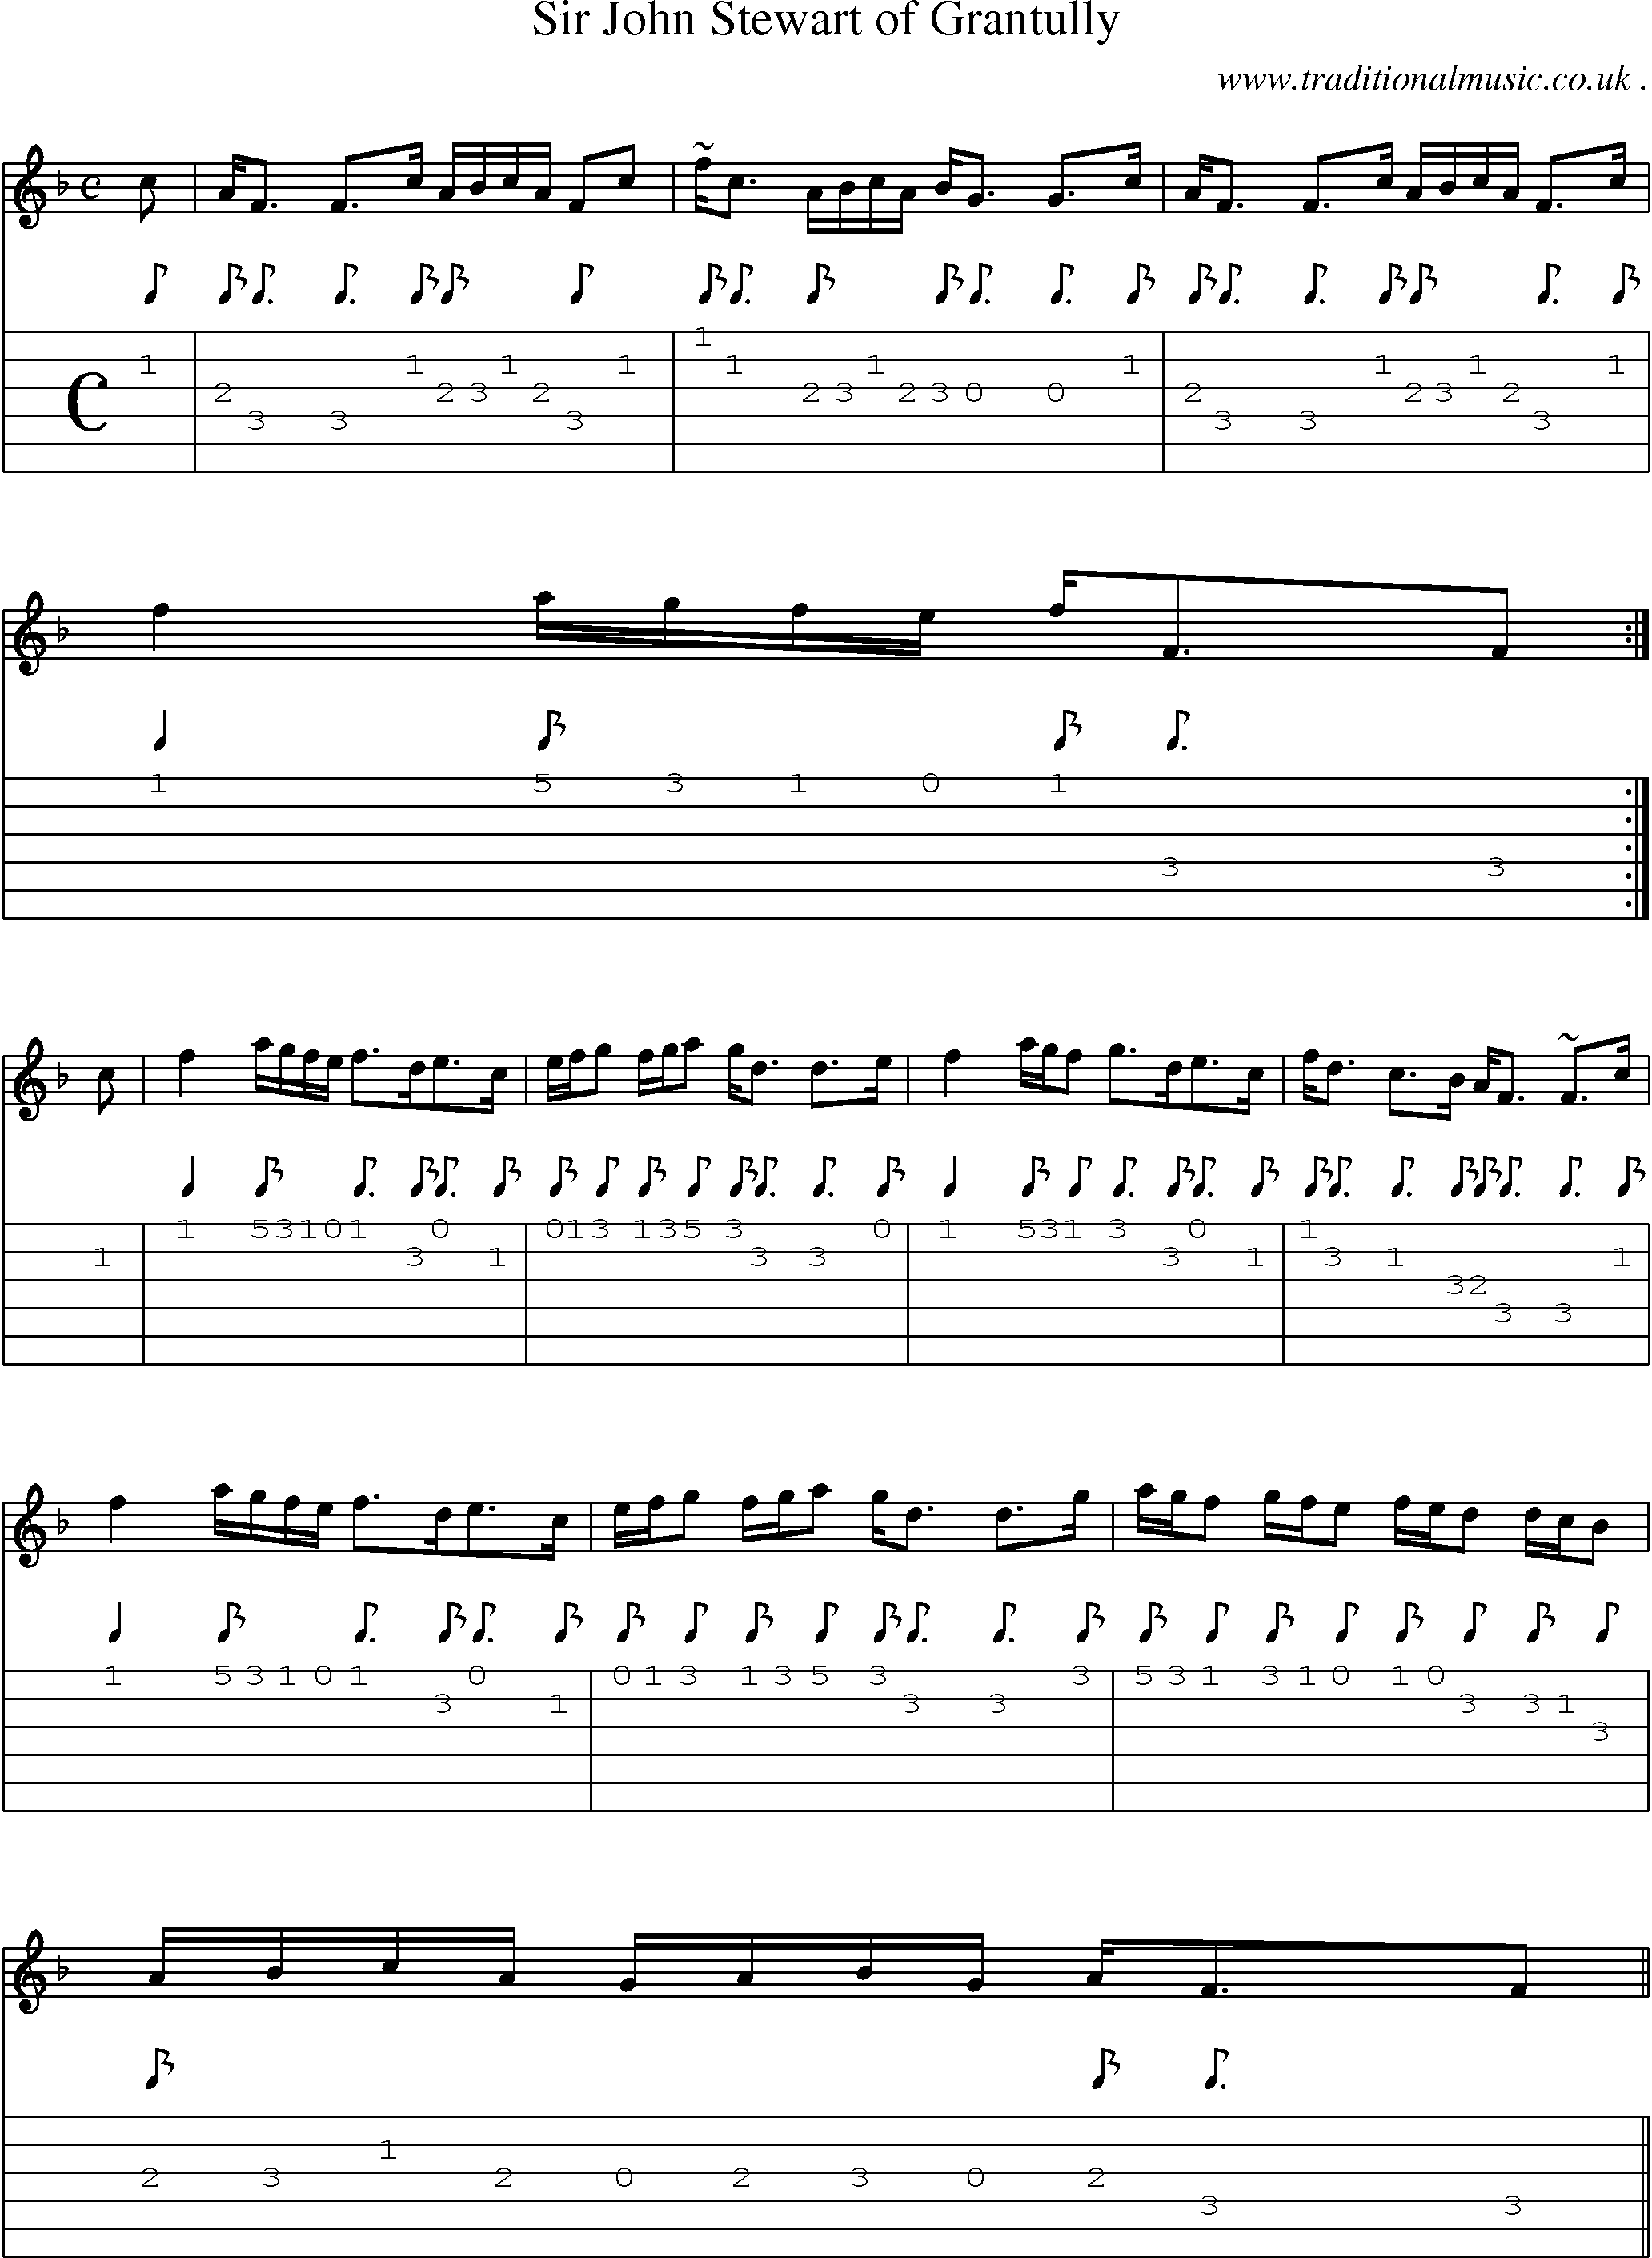 Sheet-music  score, Chords and Guitar Tabs for Sir John Stewart Of Grantully